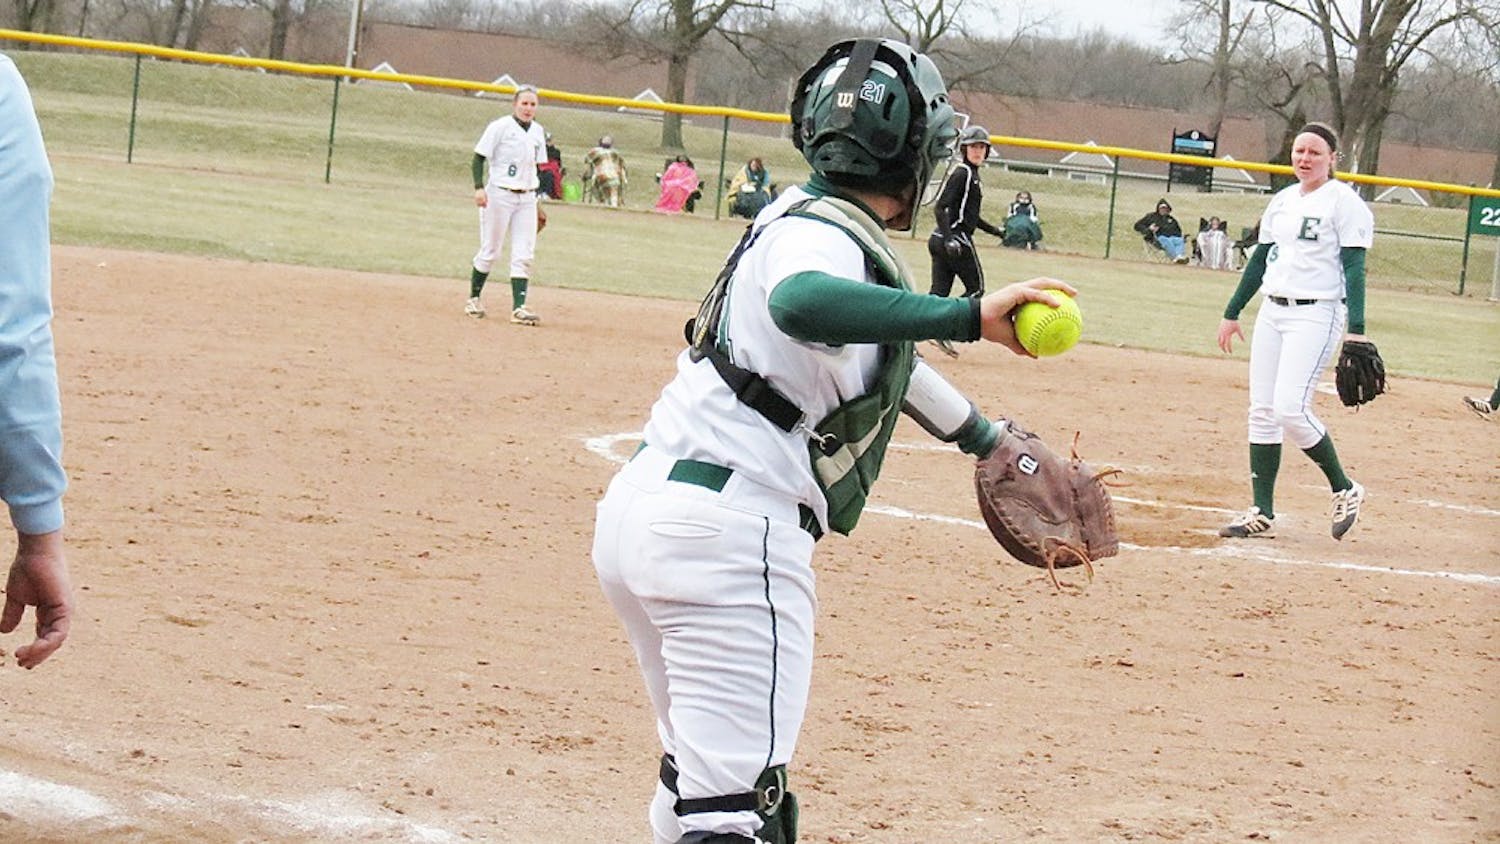 	EMU beat the Golden Grizzlies in the first game of a doubleheader Wednesday, then tied with them 4-4 in the second game.